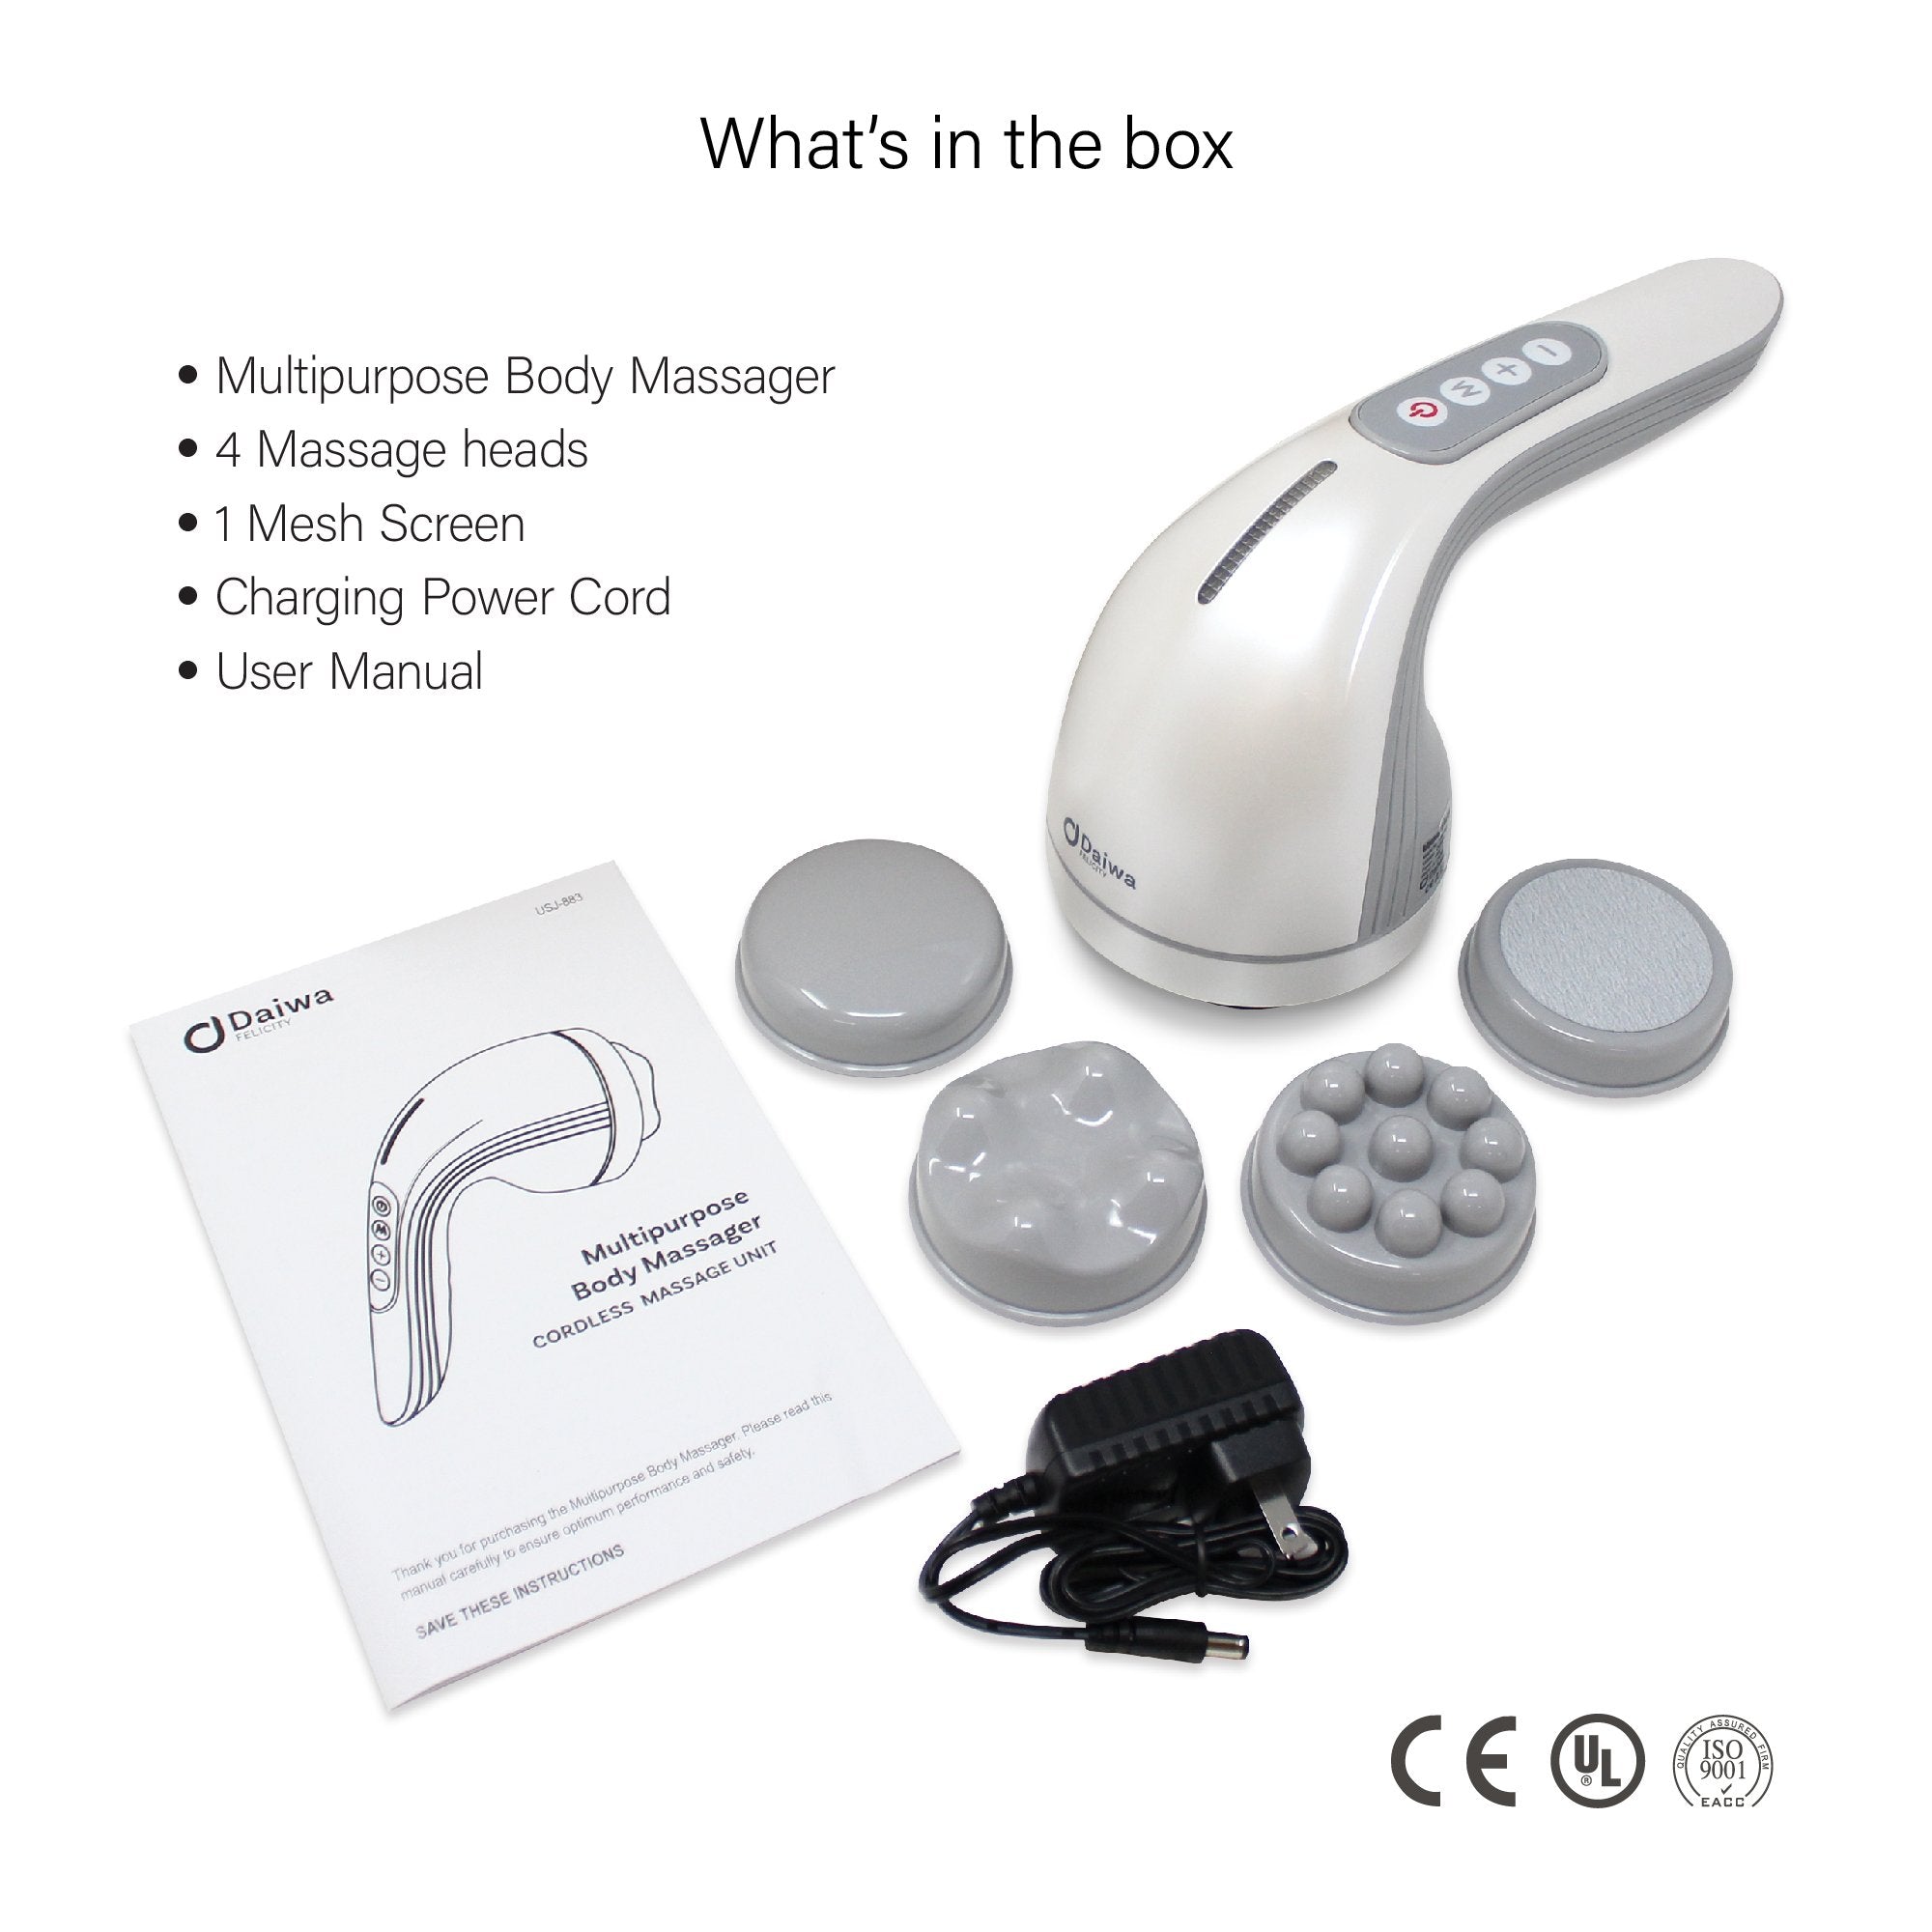 [Refurbished] Multipurpose Body Massager with 4 attachments USJ-883